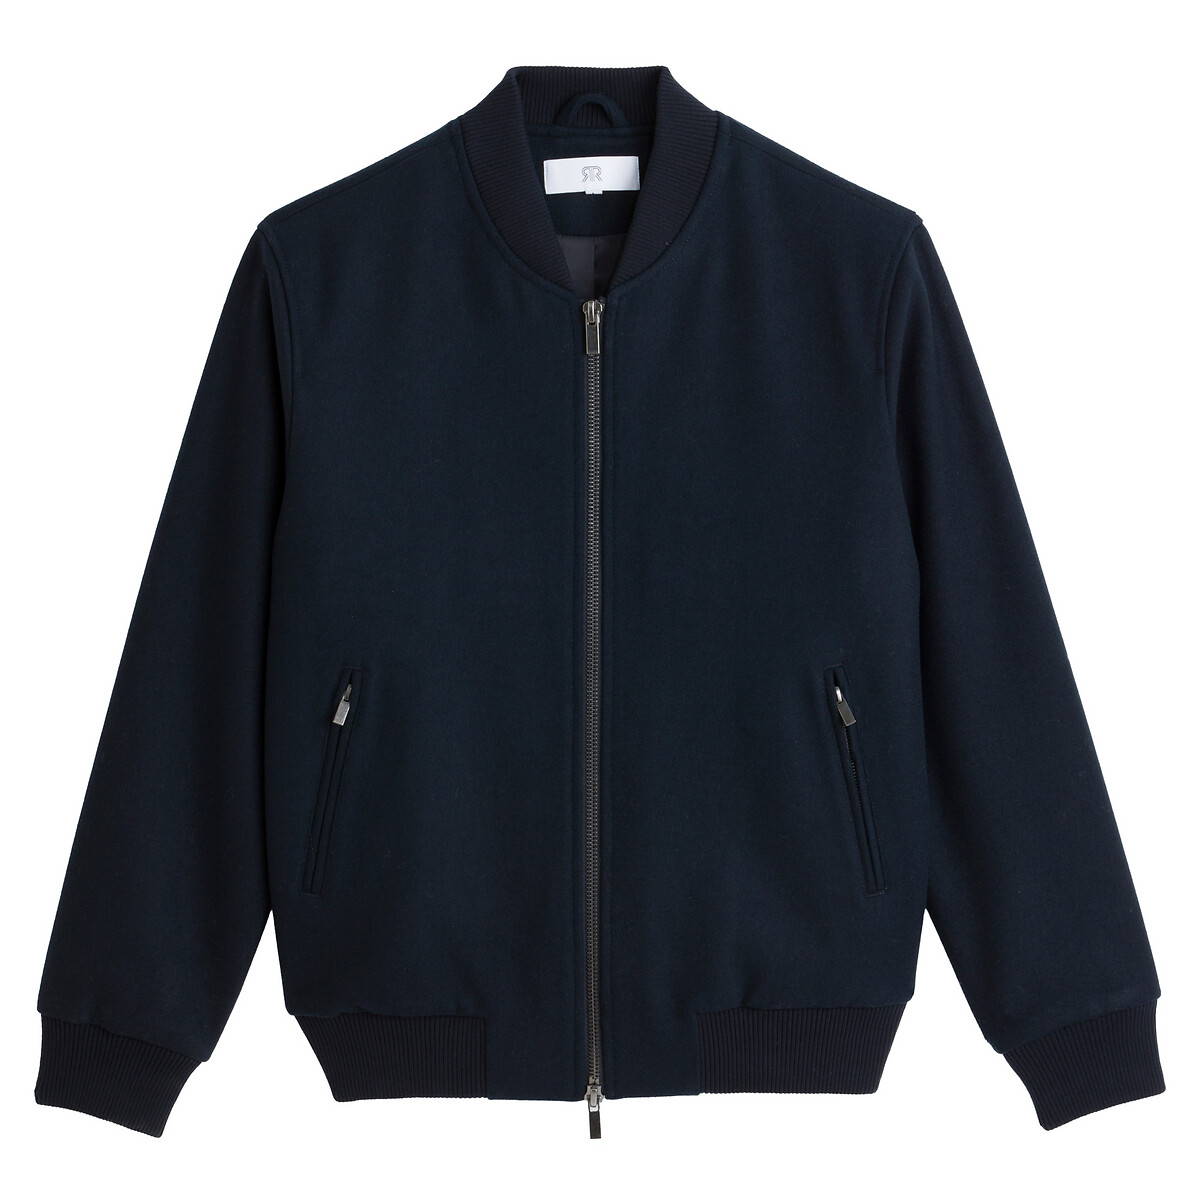 Bomberjacke, Wollmix von LA REDOUTE COLLECTIONS